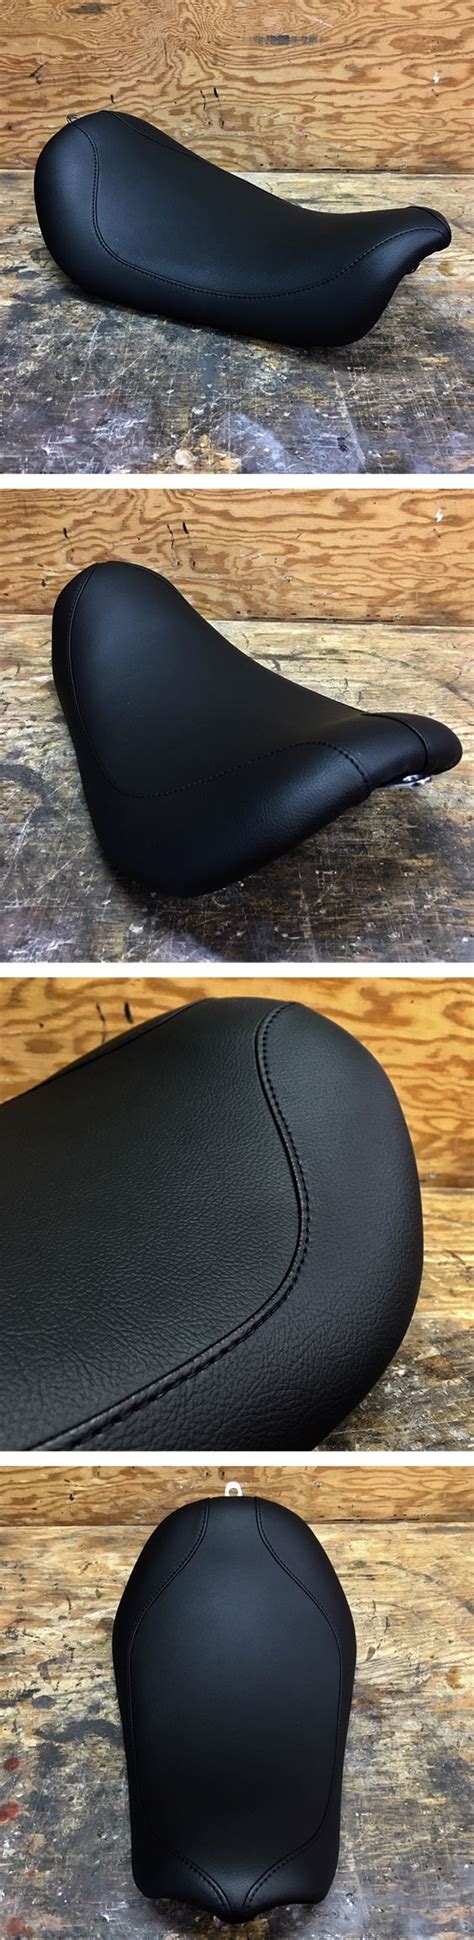 Finished This Harley Streetbob Seat Today First A Gel Insert For Some